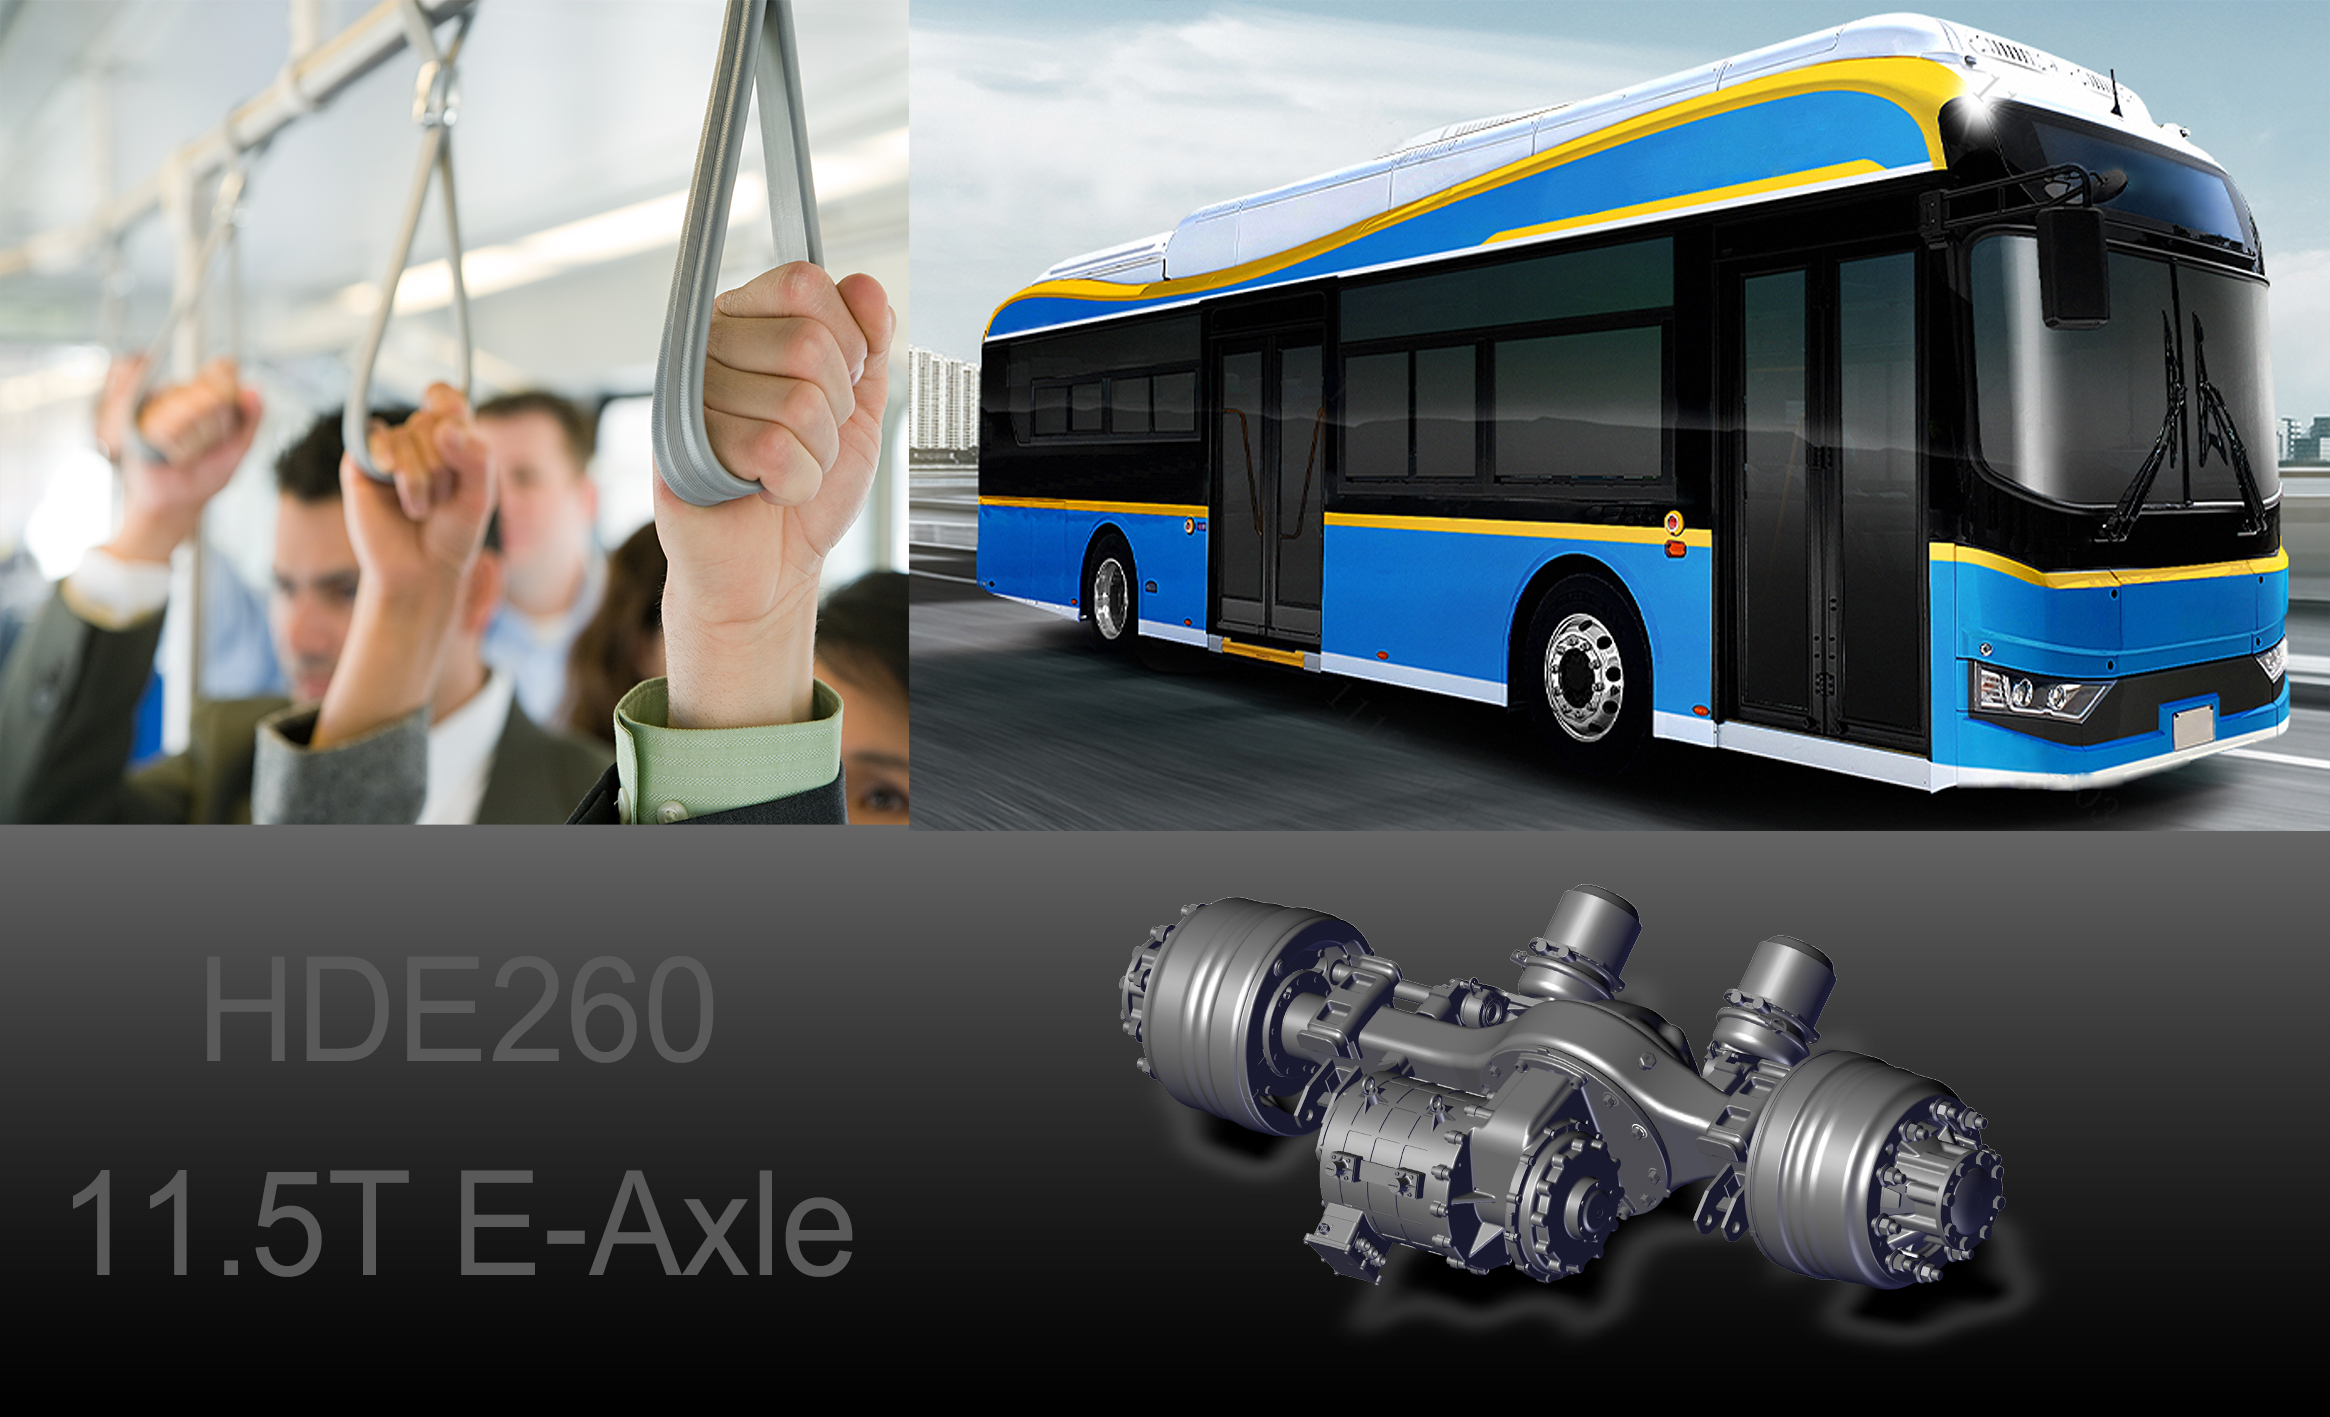 HDE260-11.5T E-axle brings passengers a quiet and comfortable experience